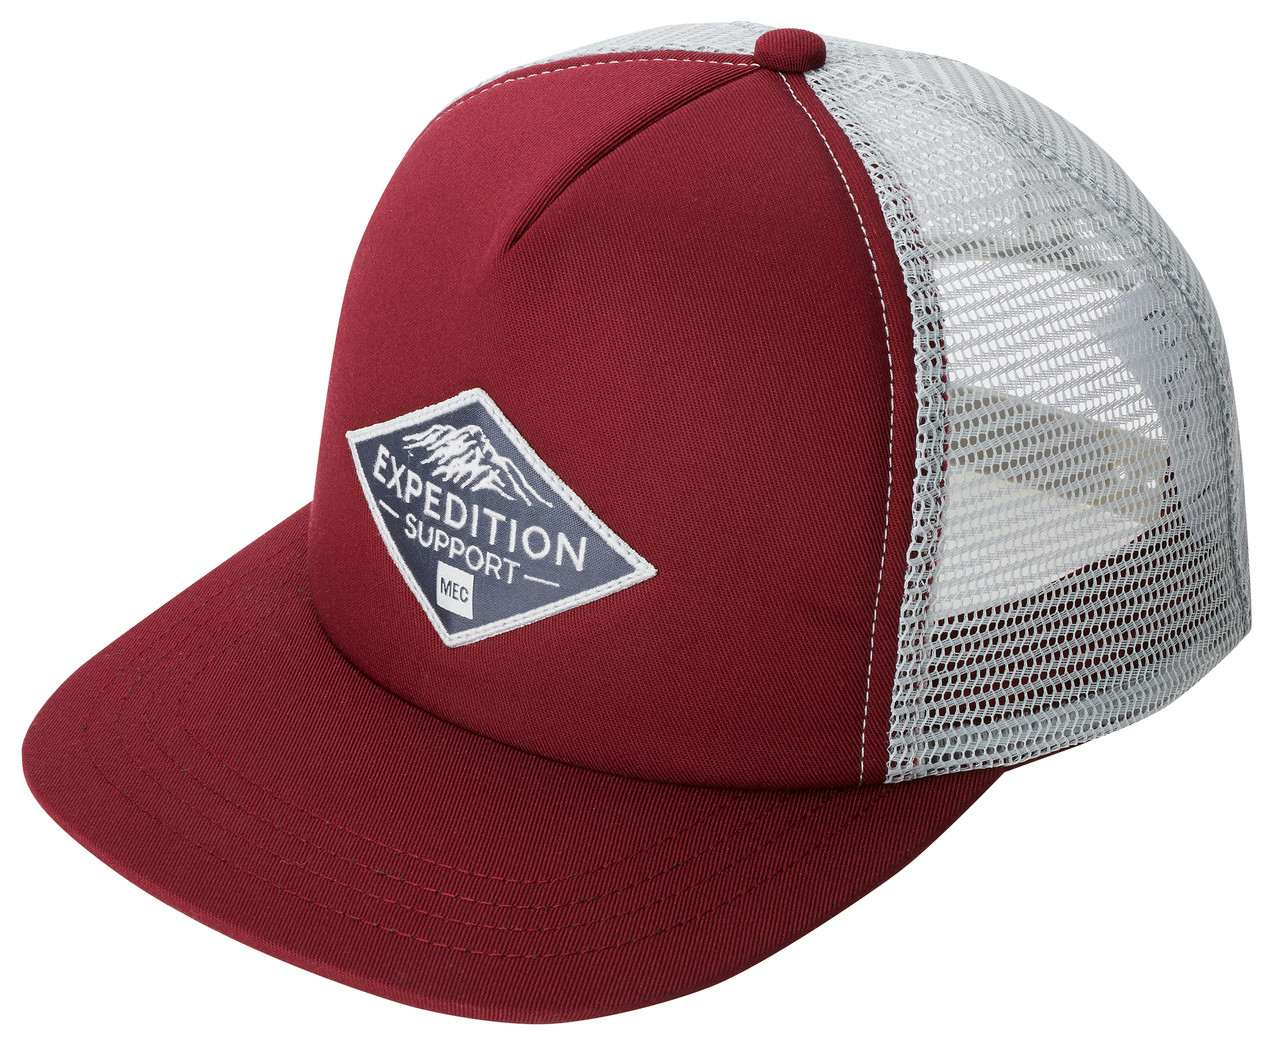 Expeditions Trucker Hat Burgundy